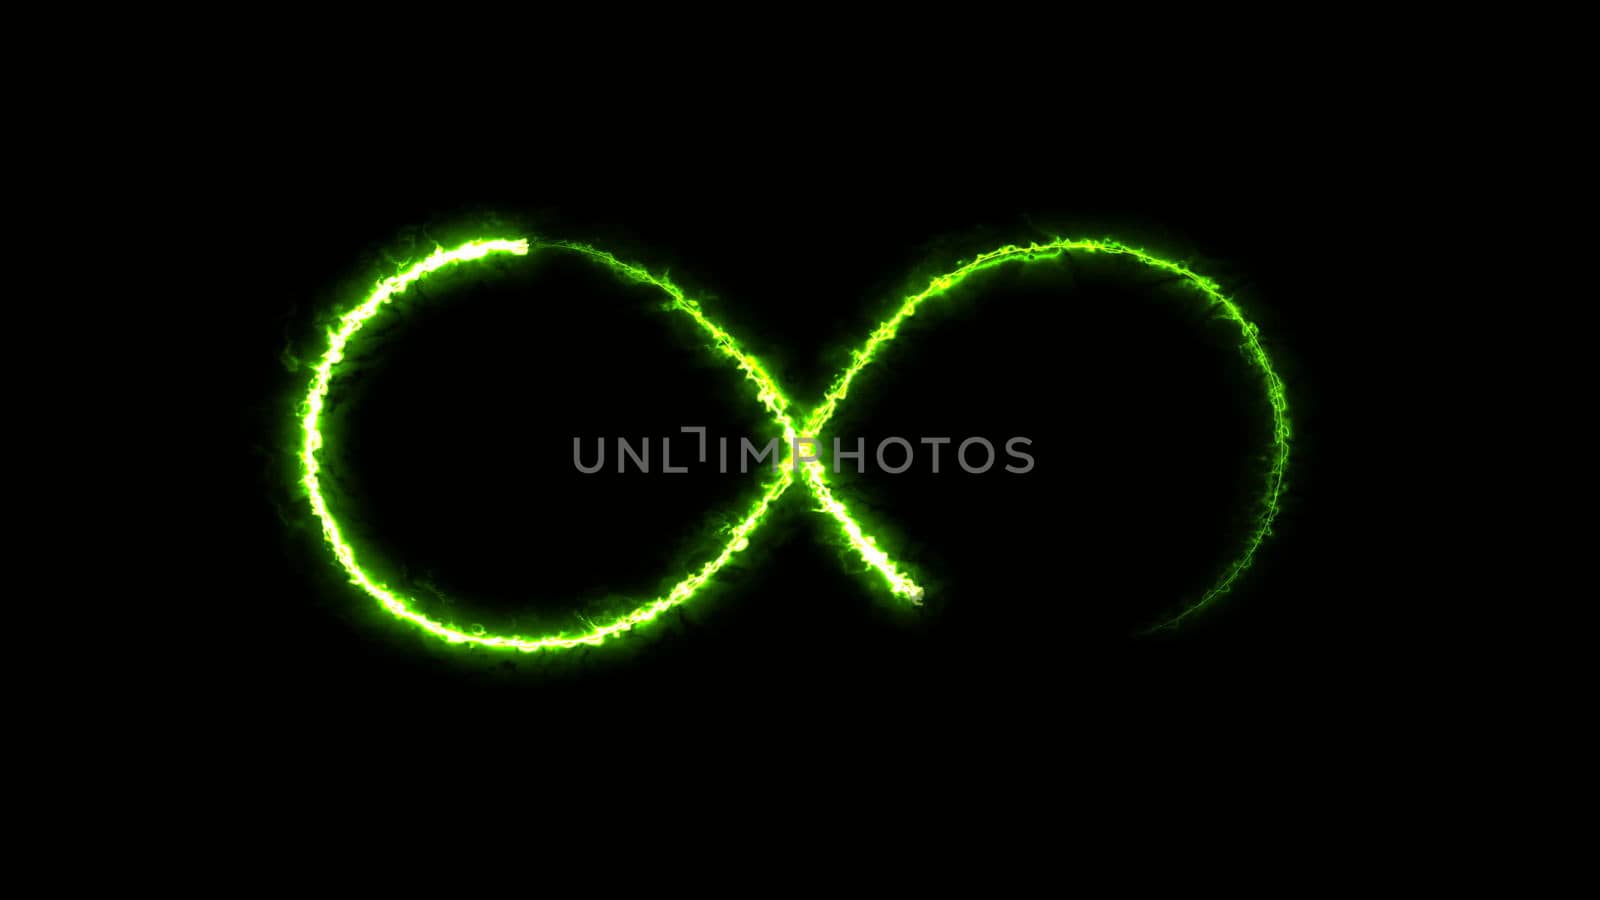 Abstract background with infinity sign. Digital illustration. 3d rendering